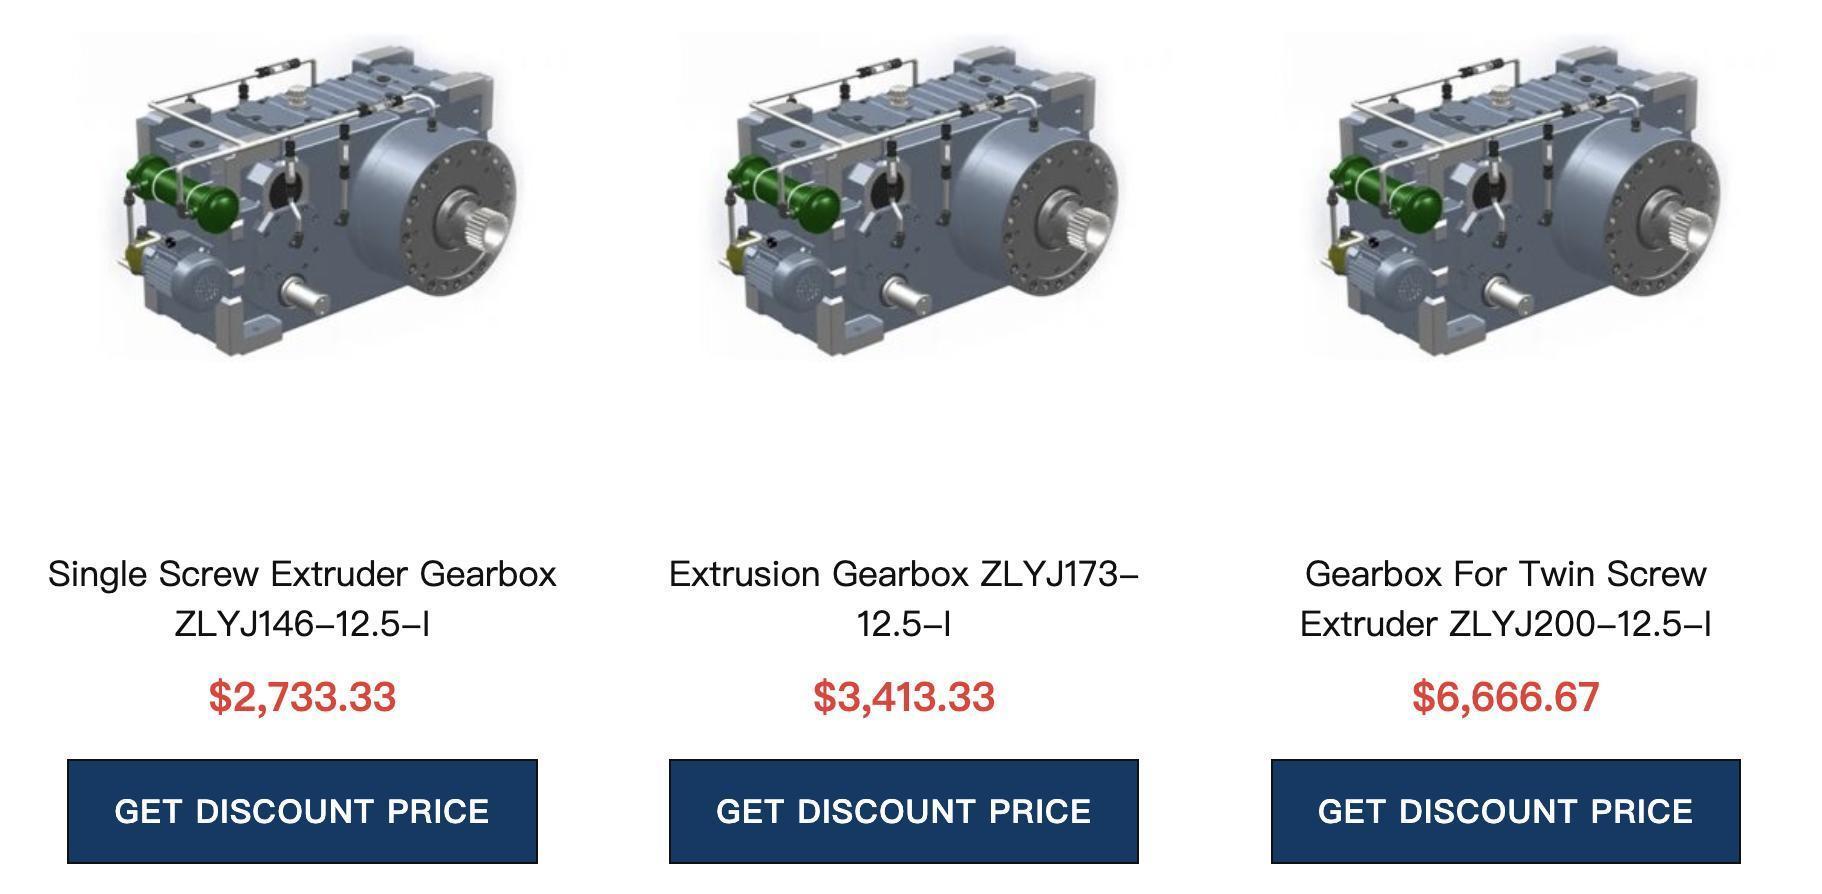 https://manufacturer.bonnew.com/gearboxes/zlyj-type.html